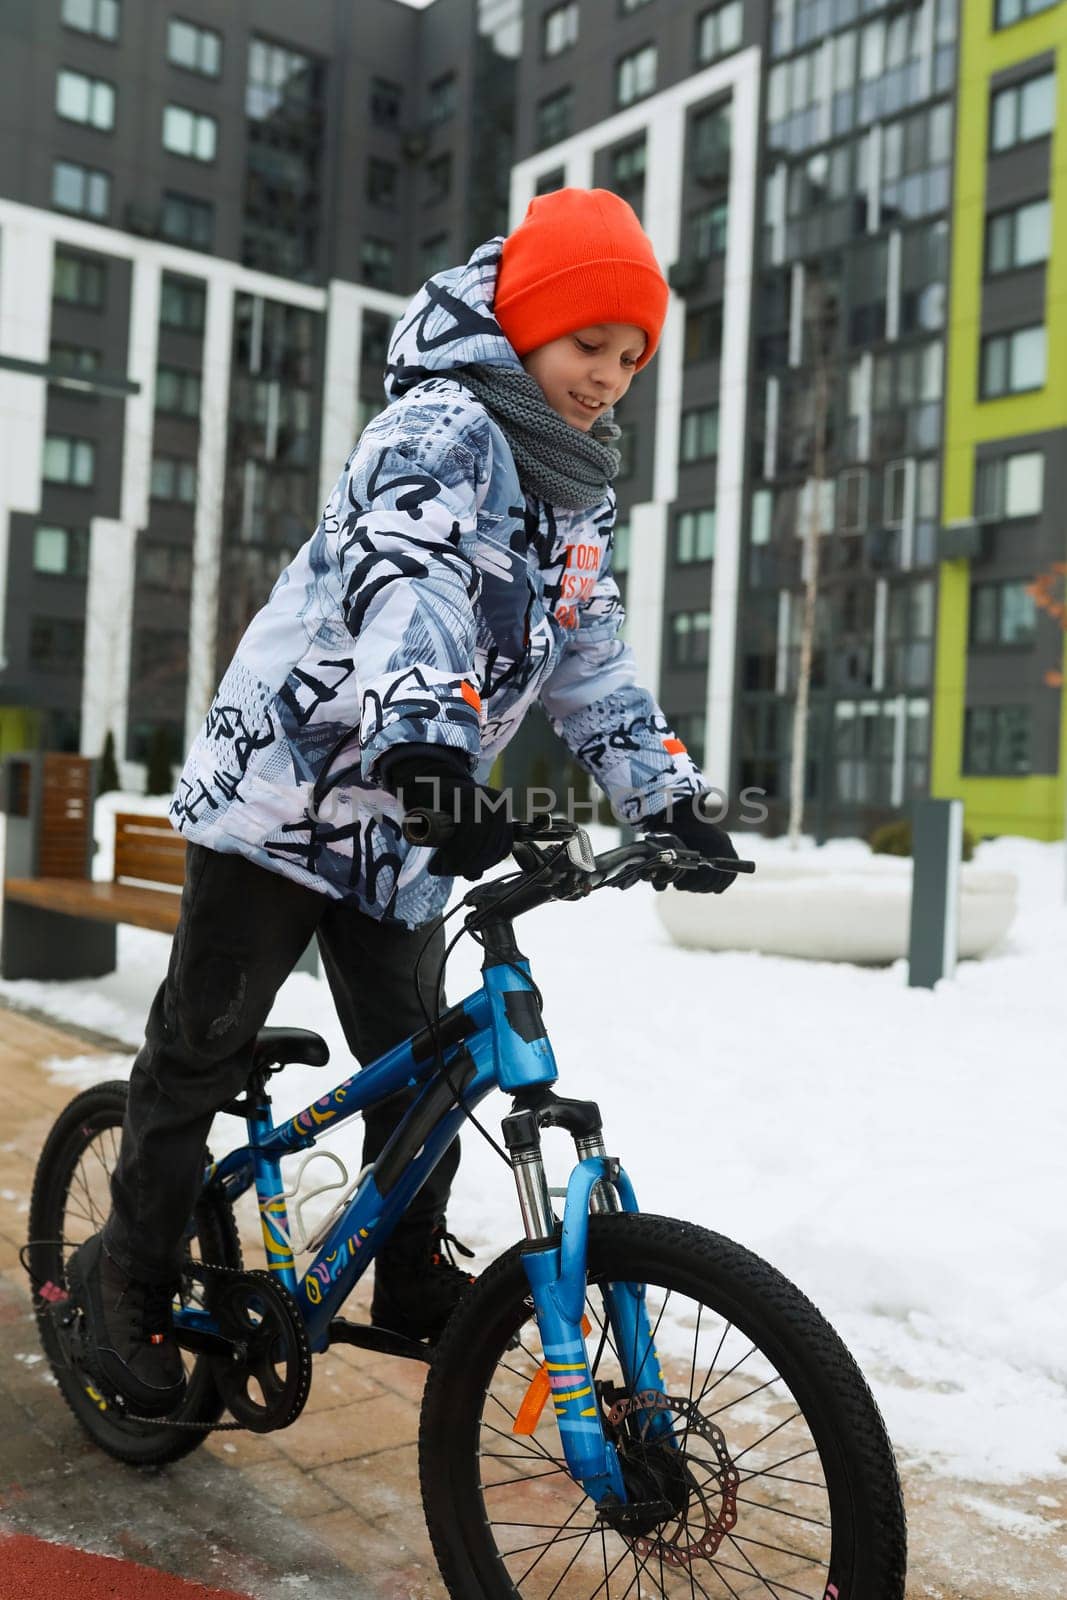 A male child rides a sports bike in the cold season by TRMK